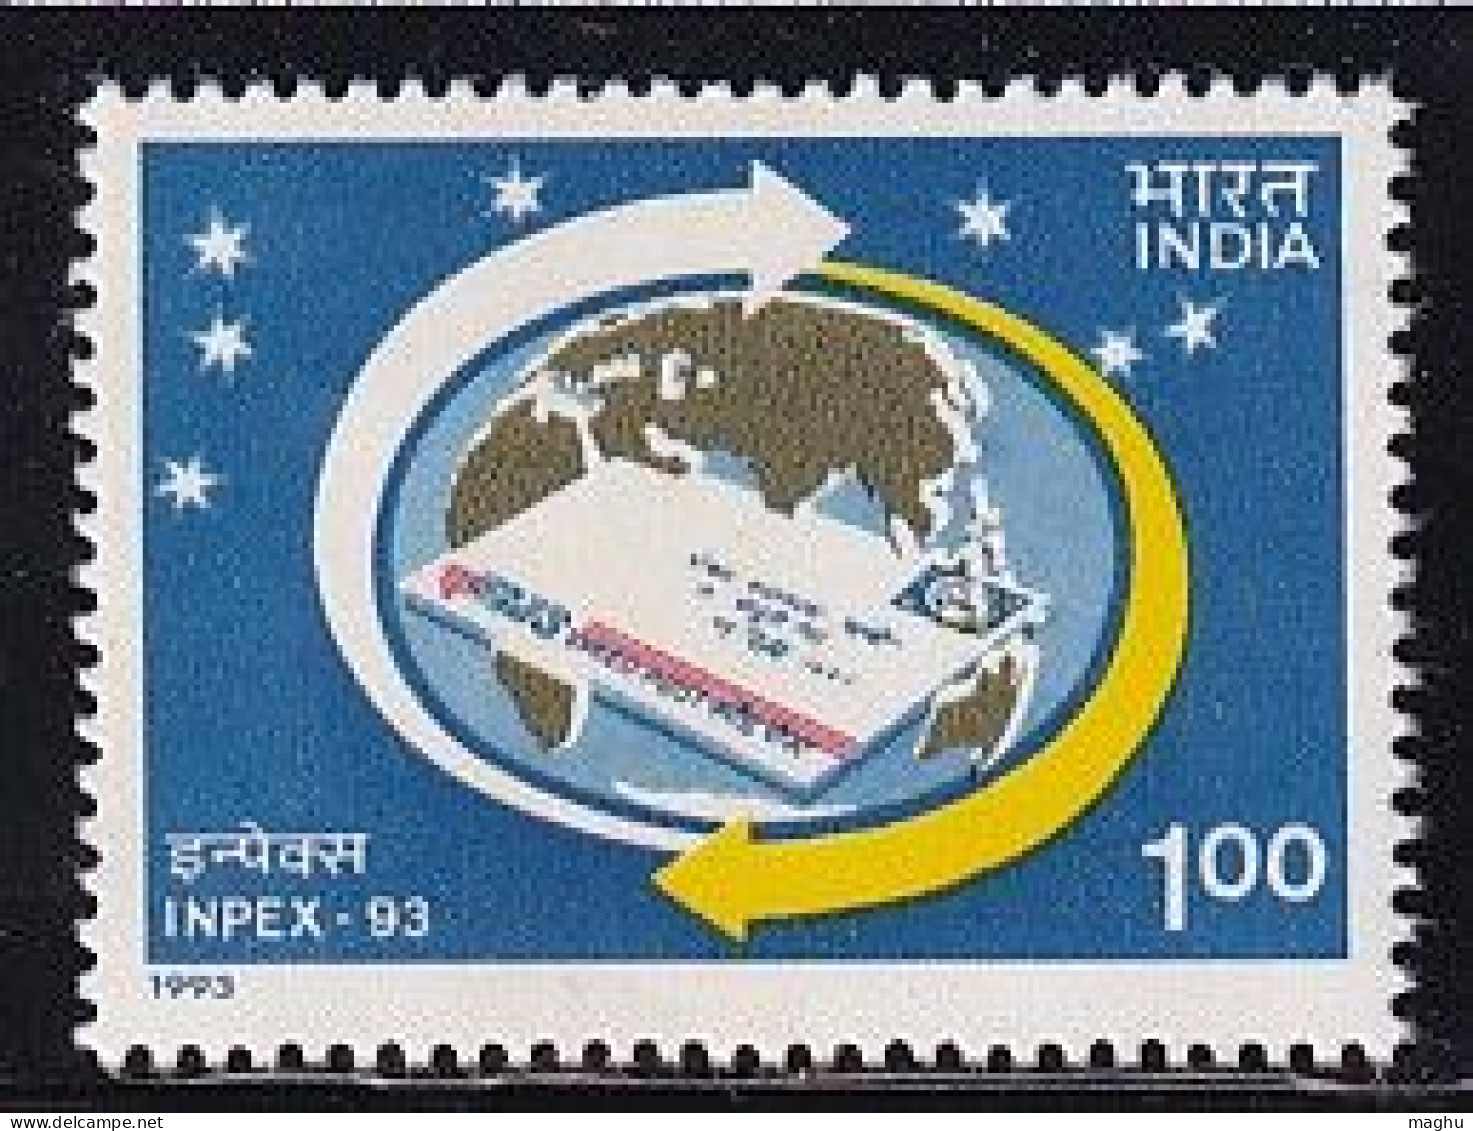 India MNH 1993, INPEX 93, Philatelic Exhibition, Speed Post Letter, Globe, Post, Philately,  Map - Unused Stamps